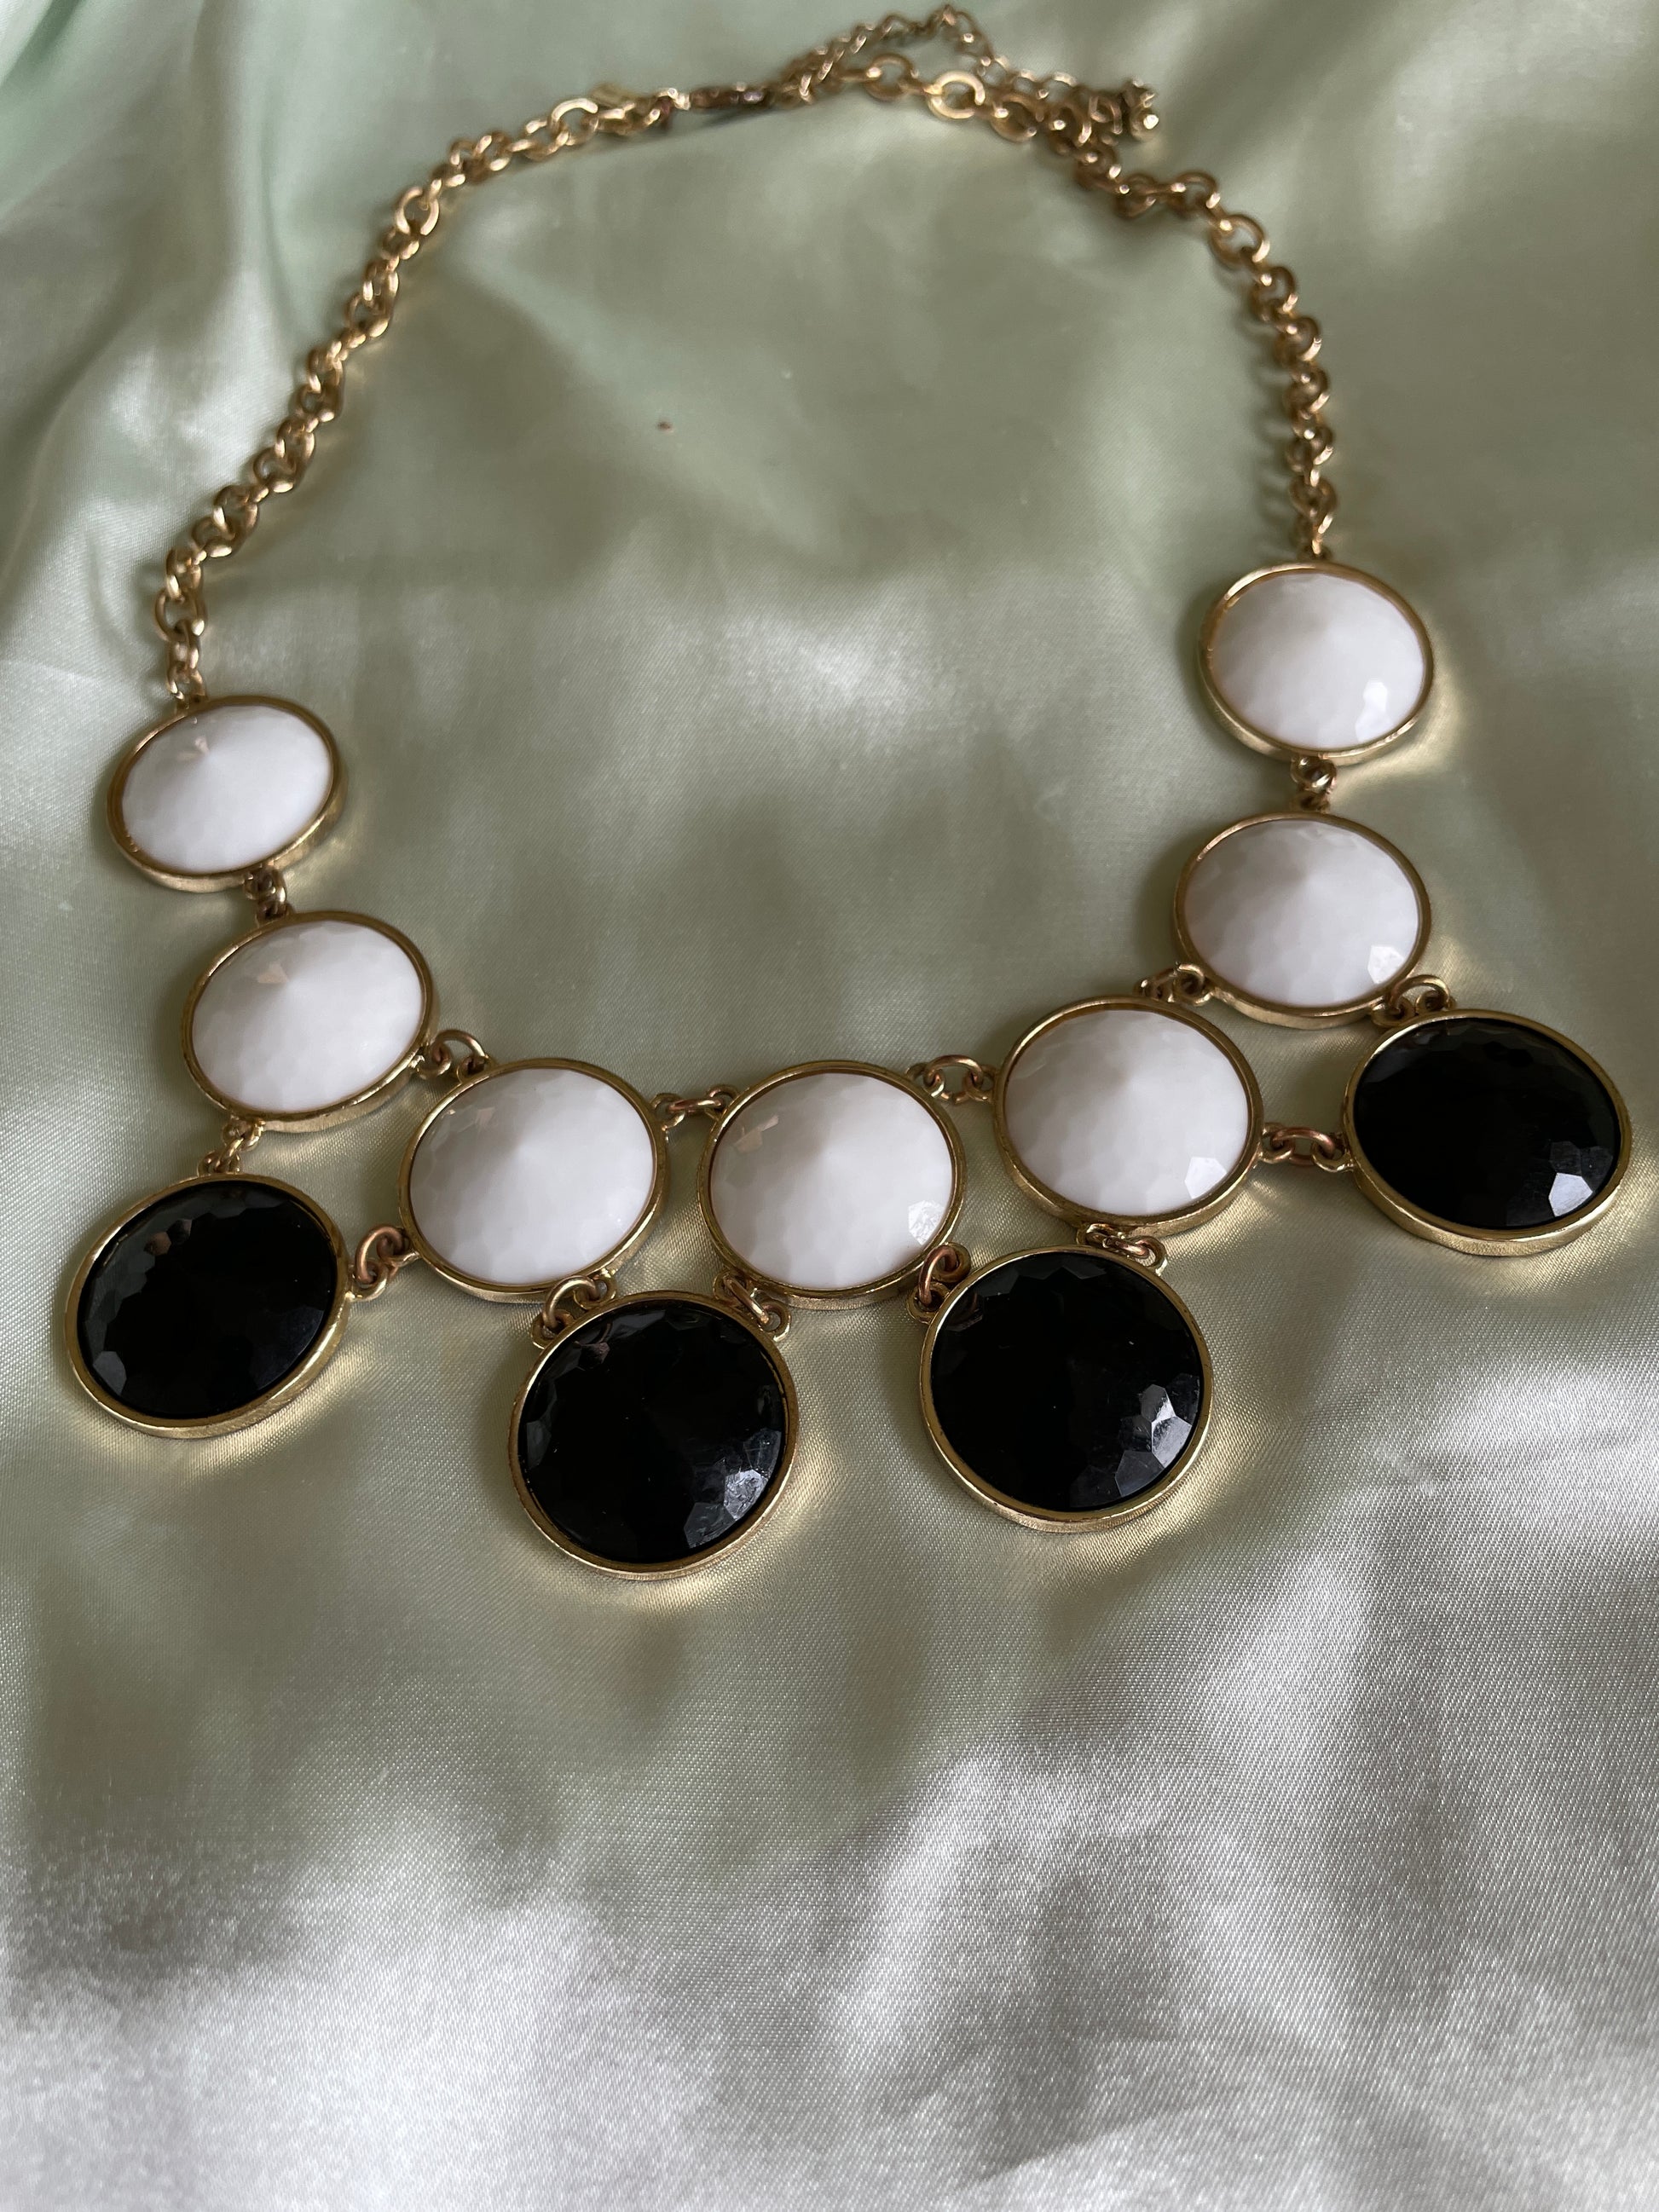  90s Signed Cookie Lee Gold Tone Black White Cabochon Bib Necklace